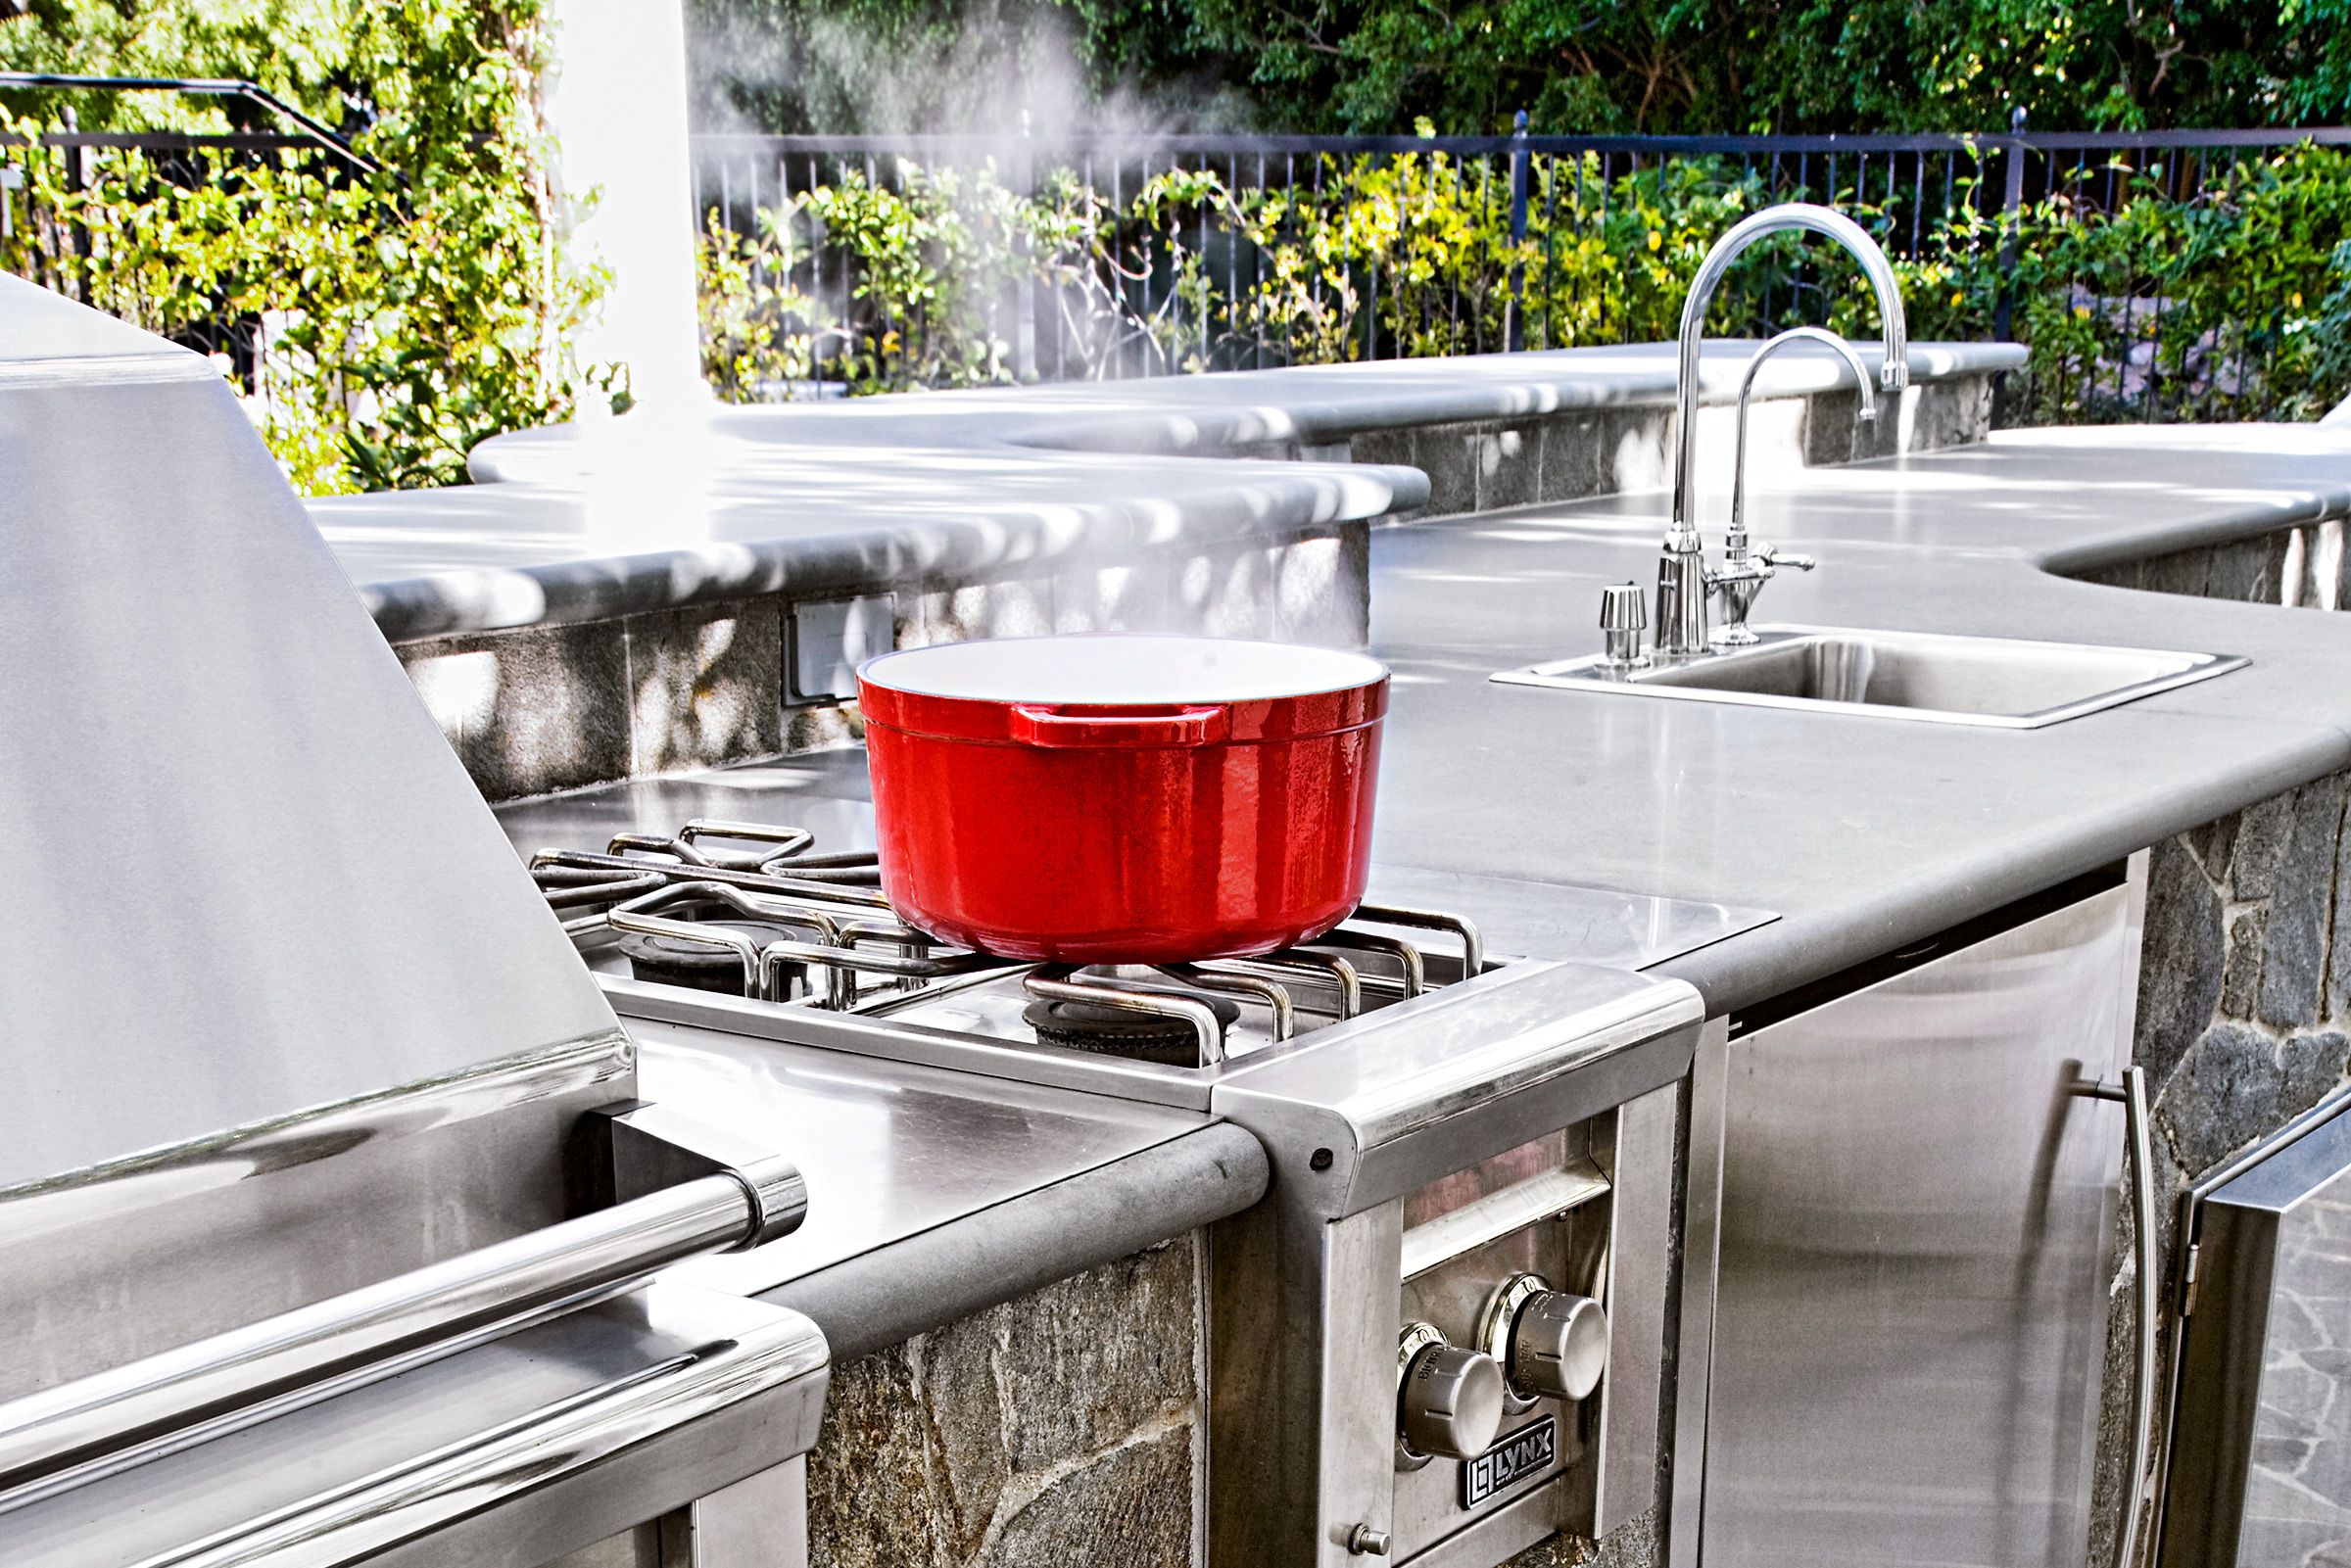 Bbq grill  Simple outdoor kitchen, Outdoor kitchen countertops, Concrete  countertops